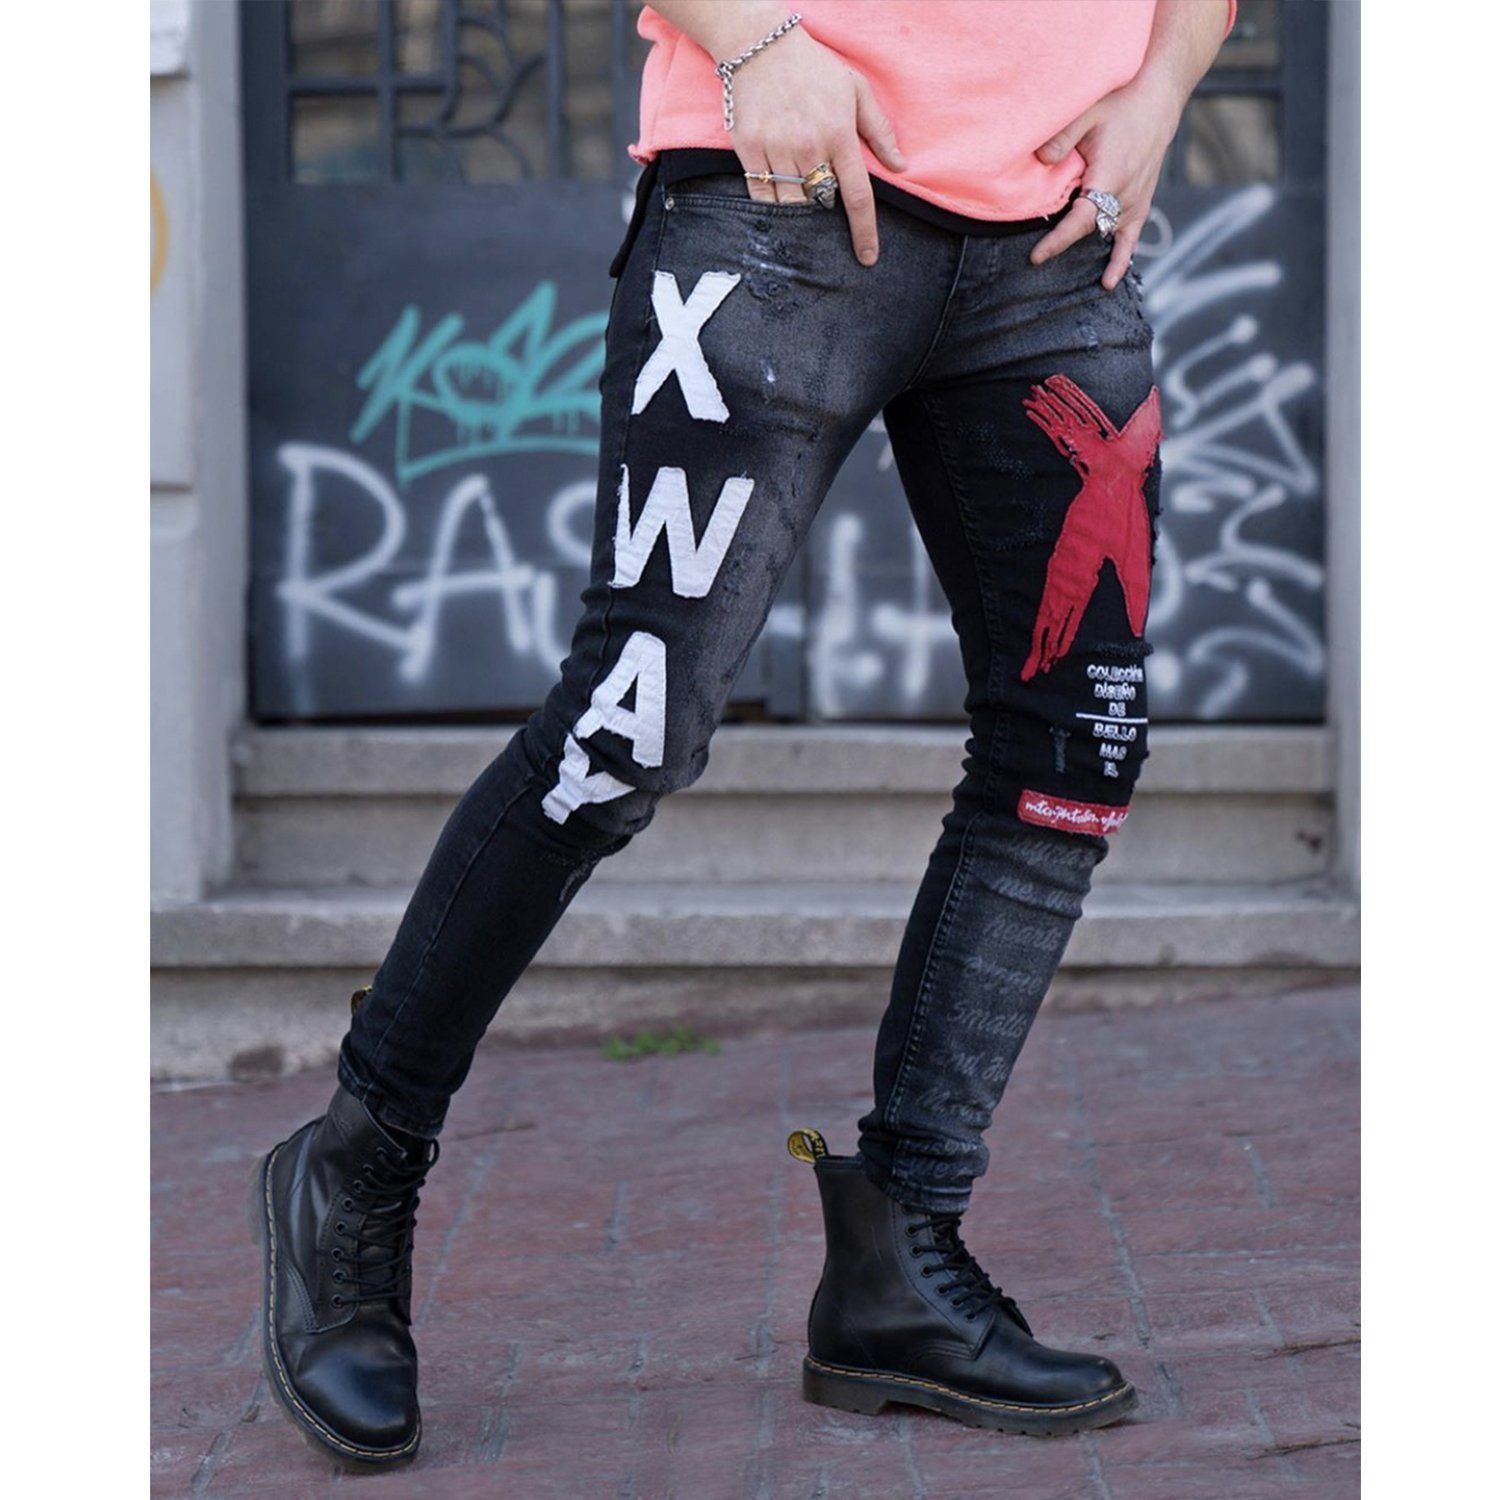 A woman wearing black MAD DOG skinny jeans and a pink t-shirt.